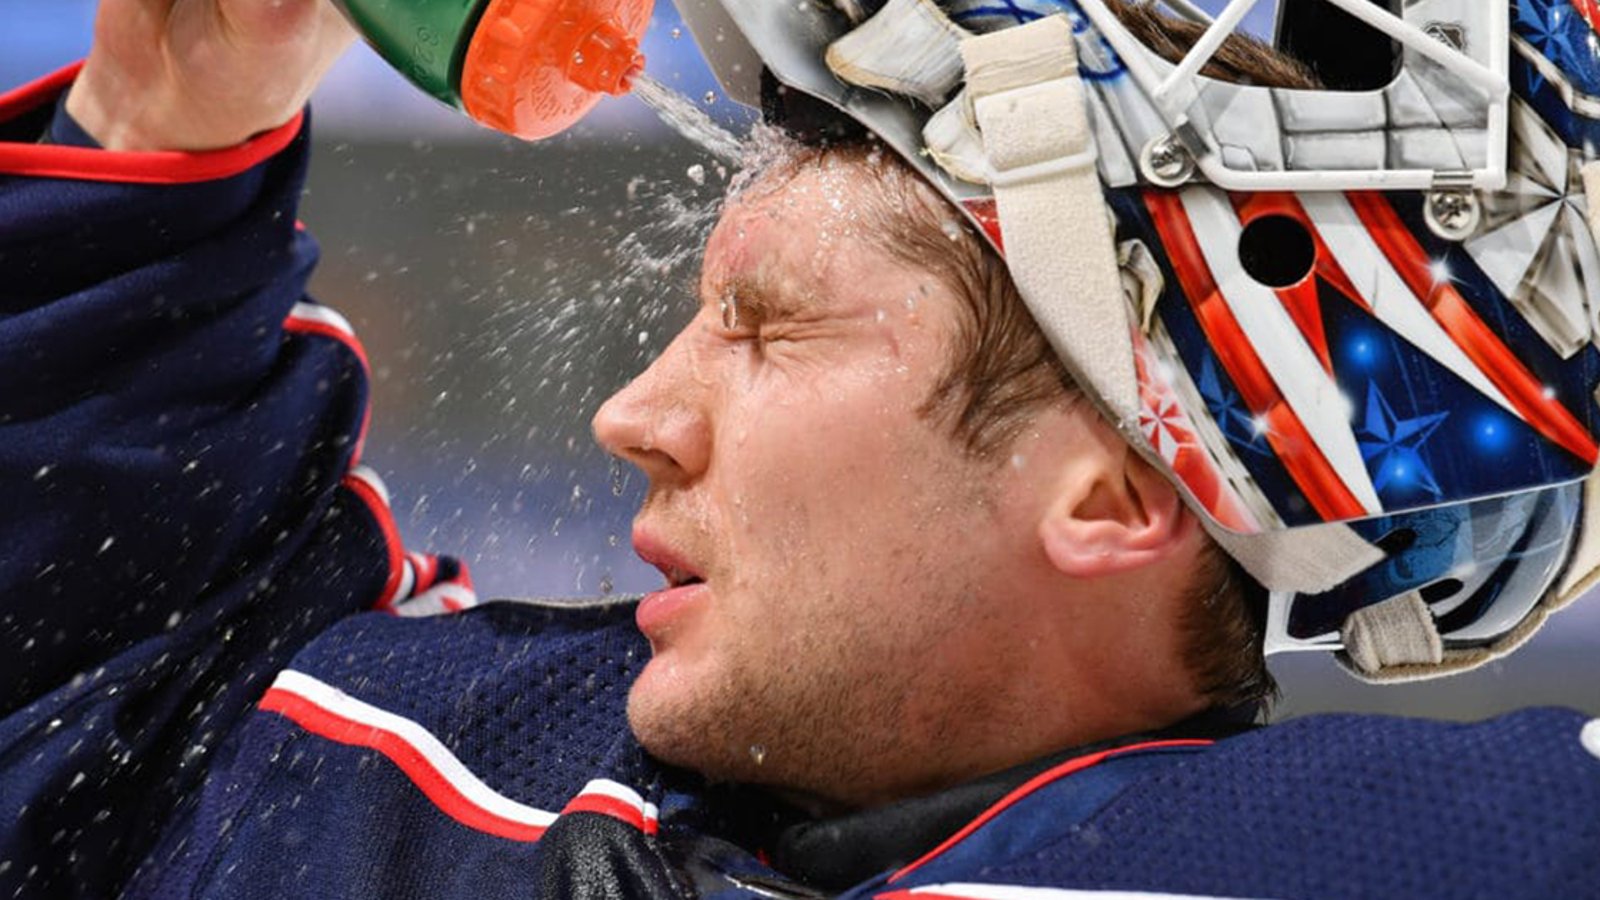 Report: Bobrovsky’s “incident” and suspension finally explained